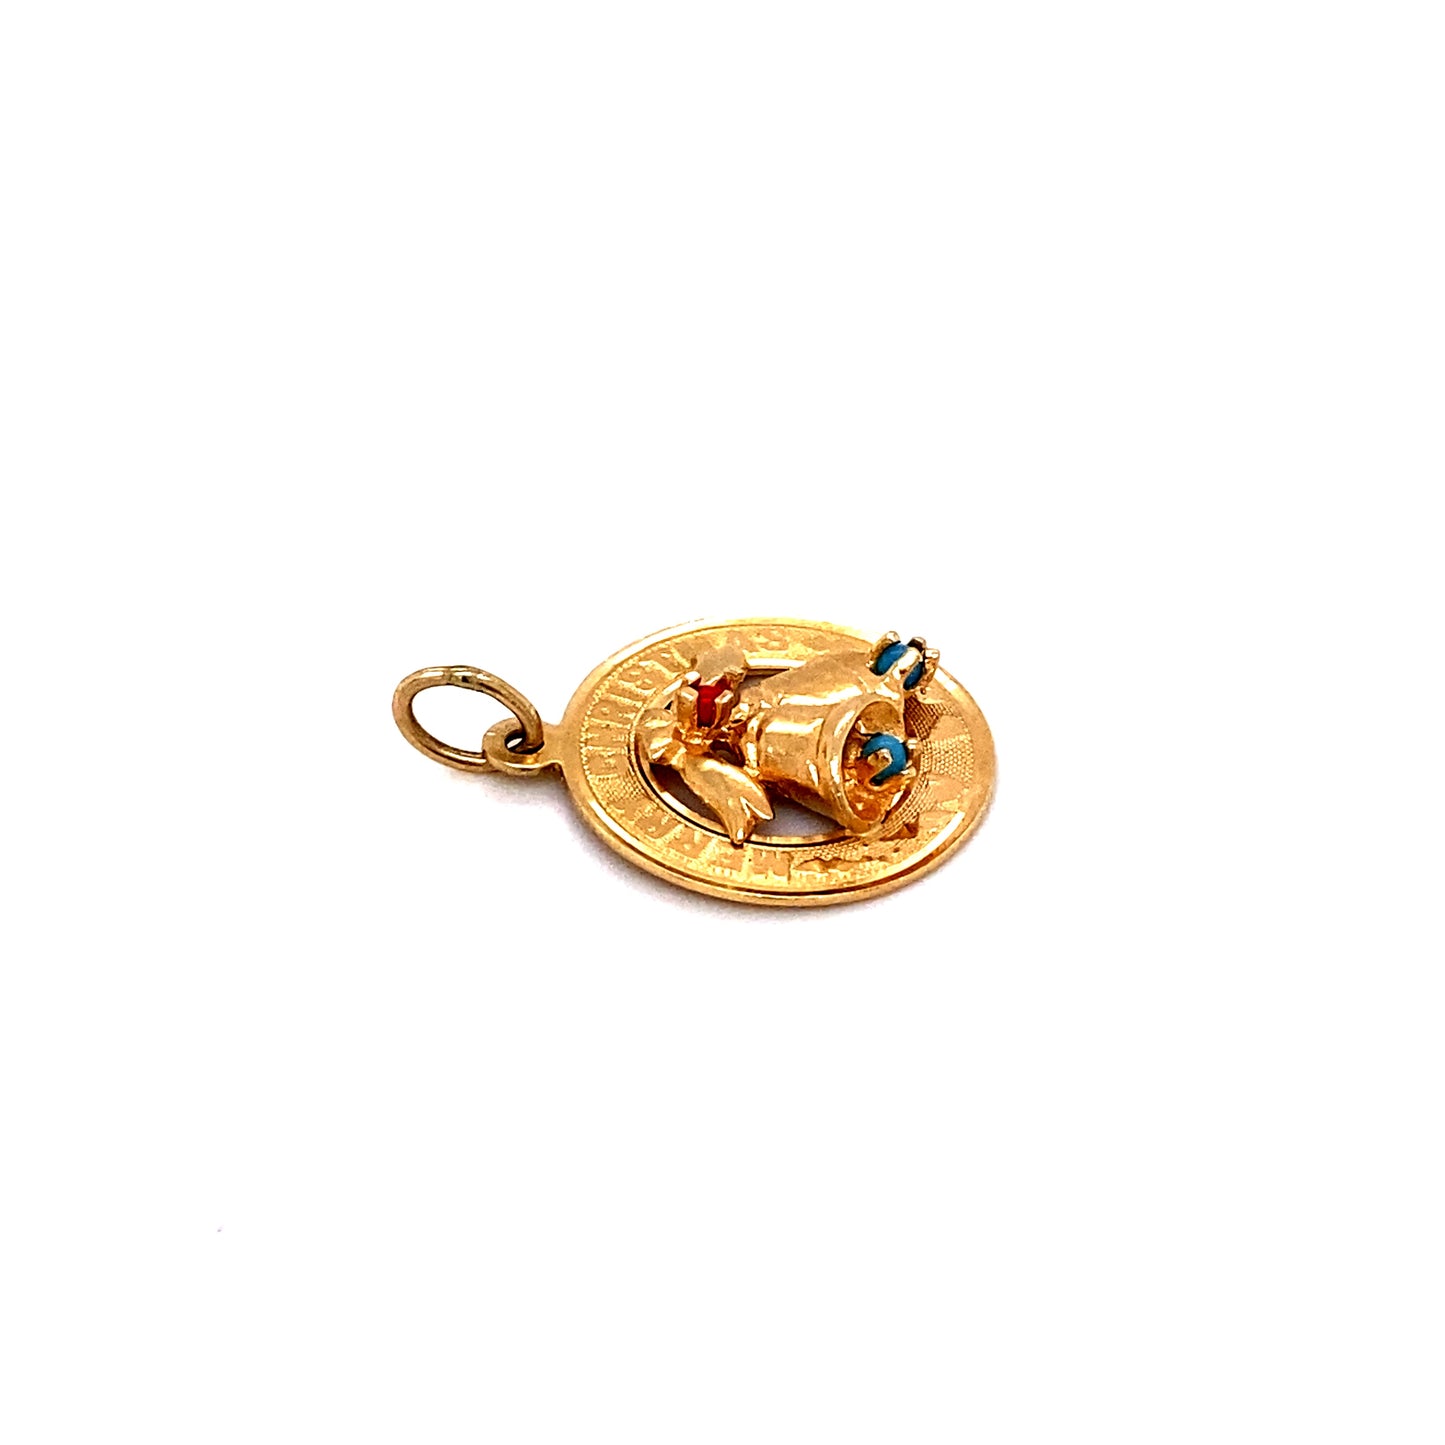 Vintage 1980s Gemstone "Merry Christmas" Bell Charm in 14k Gold